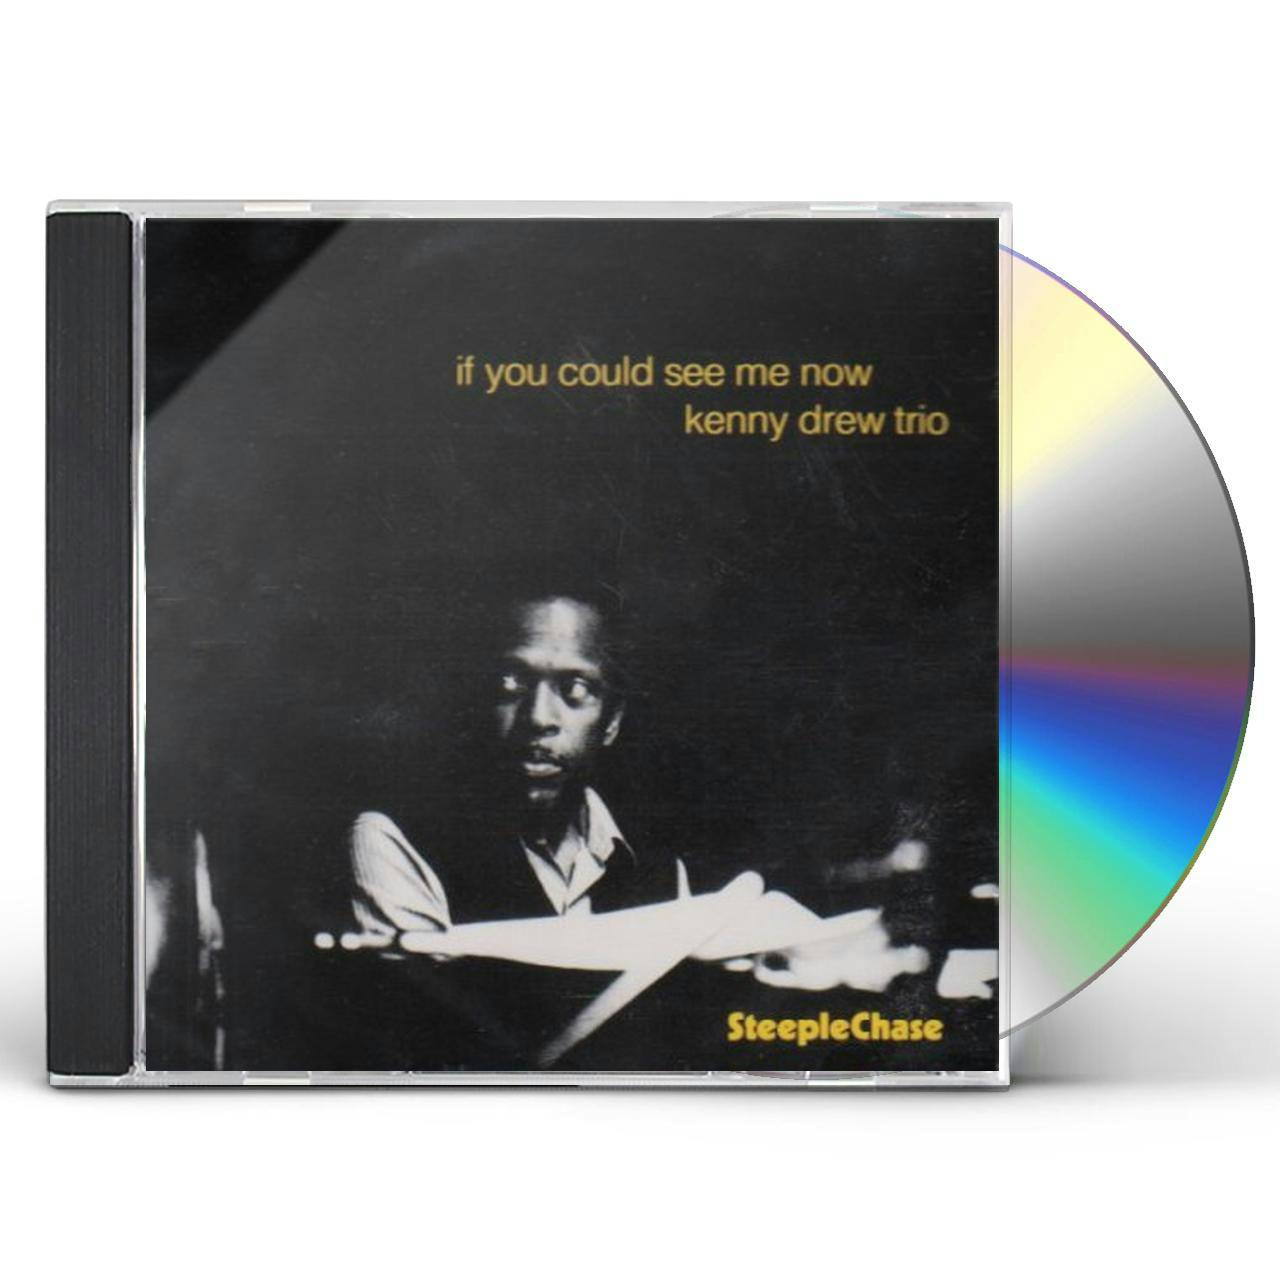 IF　NOW　SEE　YOU　ME　COULD　CD　Kenny　Drew